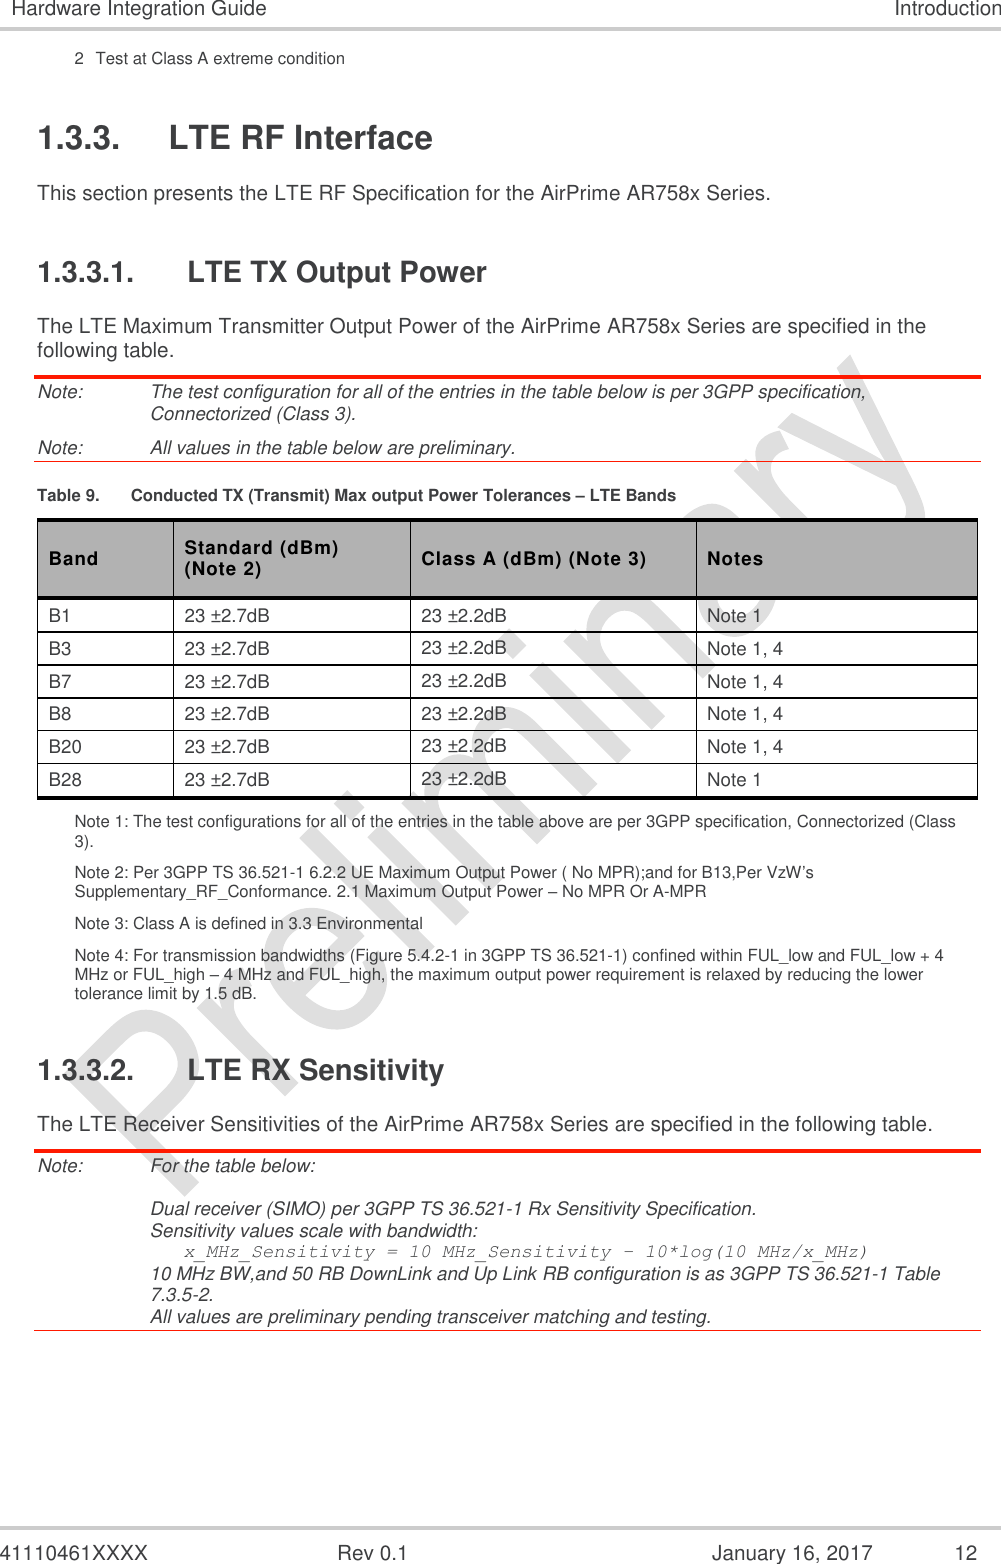  41110461XXXX  Rev 0.1  January 16, 2017  12 Hardware Integration Guide Introduction 2  Test at Class A extreme condition 1.3.3. LTE RF Interface This section presents the LTE RF Specification for the AirPrime AR758x Series. 1.3.3.1.  LTE TX Output Power The LTE Maximum Transmitter Output Power of the AirPrime AR758x Series are specified in the following table. Note:   The test configuration for all of the entries in the table below is per 3GPP specification, Connectorized (Class 3). Note:   All values in the table below are preliminary. Table 9.  Conducted TX (Transmit) Max output Power Tolerances – LTE Bands Band Standard (dBm) (Note 2) Class A (dBm) (Note 3) Notes B1 23 ±2.7dB 23 ±2.2dB Note 1 B3 23 ±2.7dB 23 ±2.2dB Note 1, 4 B7 23 ±2.7dB 23 ±2.2dB Note 1, 4 B8 23 ±2.7dB 23 ±2.2dB Note 1, 4 B20 23 ±2.7dB 23 ±2.2dB Note 1, 4 B28 23 ±2.7dB 23 ±2.2dB Note 1 Note 1: The test configurations for all of the entries in the table above are per 3GPP specification, Connectorized (Class 3). Note 2: Per 3GPP TS 36.521-1 6.2.2 UE Maximum Output Power ( No MPR);and for B13,Per VzW’s Supplementary_RF_Conformance. 2.1 Maximum Output Power – No MPR Or A-MPR Note 3: Class A is defined in 3.3 Environmental Note 4: For transmission bandwidths (Figure 5.4.2-1 in 3GPP TS 36.521-1) confined within FUL_low and FUL_low + 4 MHz or FUL_high – 4 MHz and FUL_high, the maximum output power requirement is relaxed by reducing the lower tolerance limit by 1.5 dB. 1.3.3.2.  LTE RX Sensitivity The LTE Receiver Sensitivities of the AirPrime AR758x Series are specified in the following table. Note:   For the table below:  Dual receiver (SIMO) per 3GPP TS 36.521-1 Rx Sensitivity Specification. Sensitivity values scale with bandwidth:    x_MHz_Sensitivity = 10 MHz_Sensitivity – 10*log(10 MHz/x_MHz) 10 MHz BW,and 50 RB DownLink and Up Link RB configuration is as 3GPP TS 36.521-1 Table 7.3.5-2. All values are preliminary pending transceiver matching and testing. 